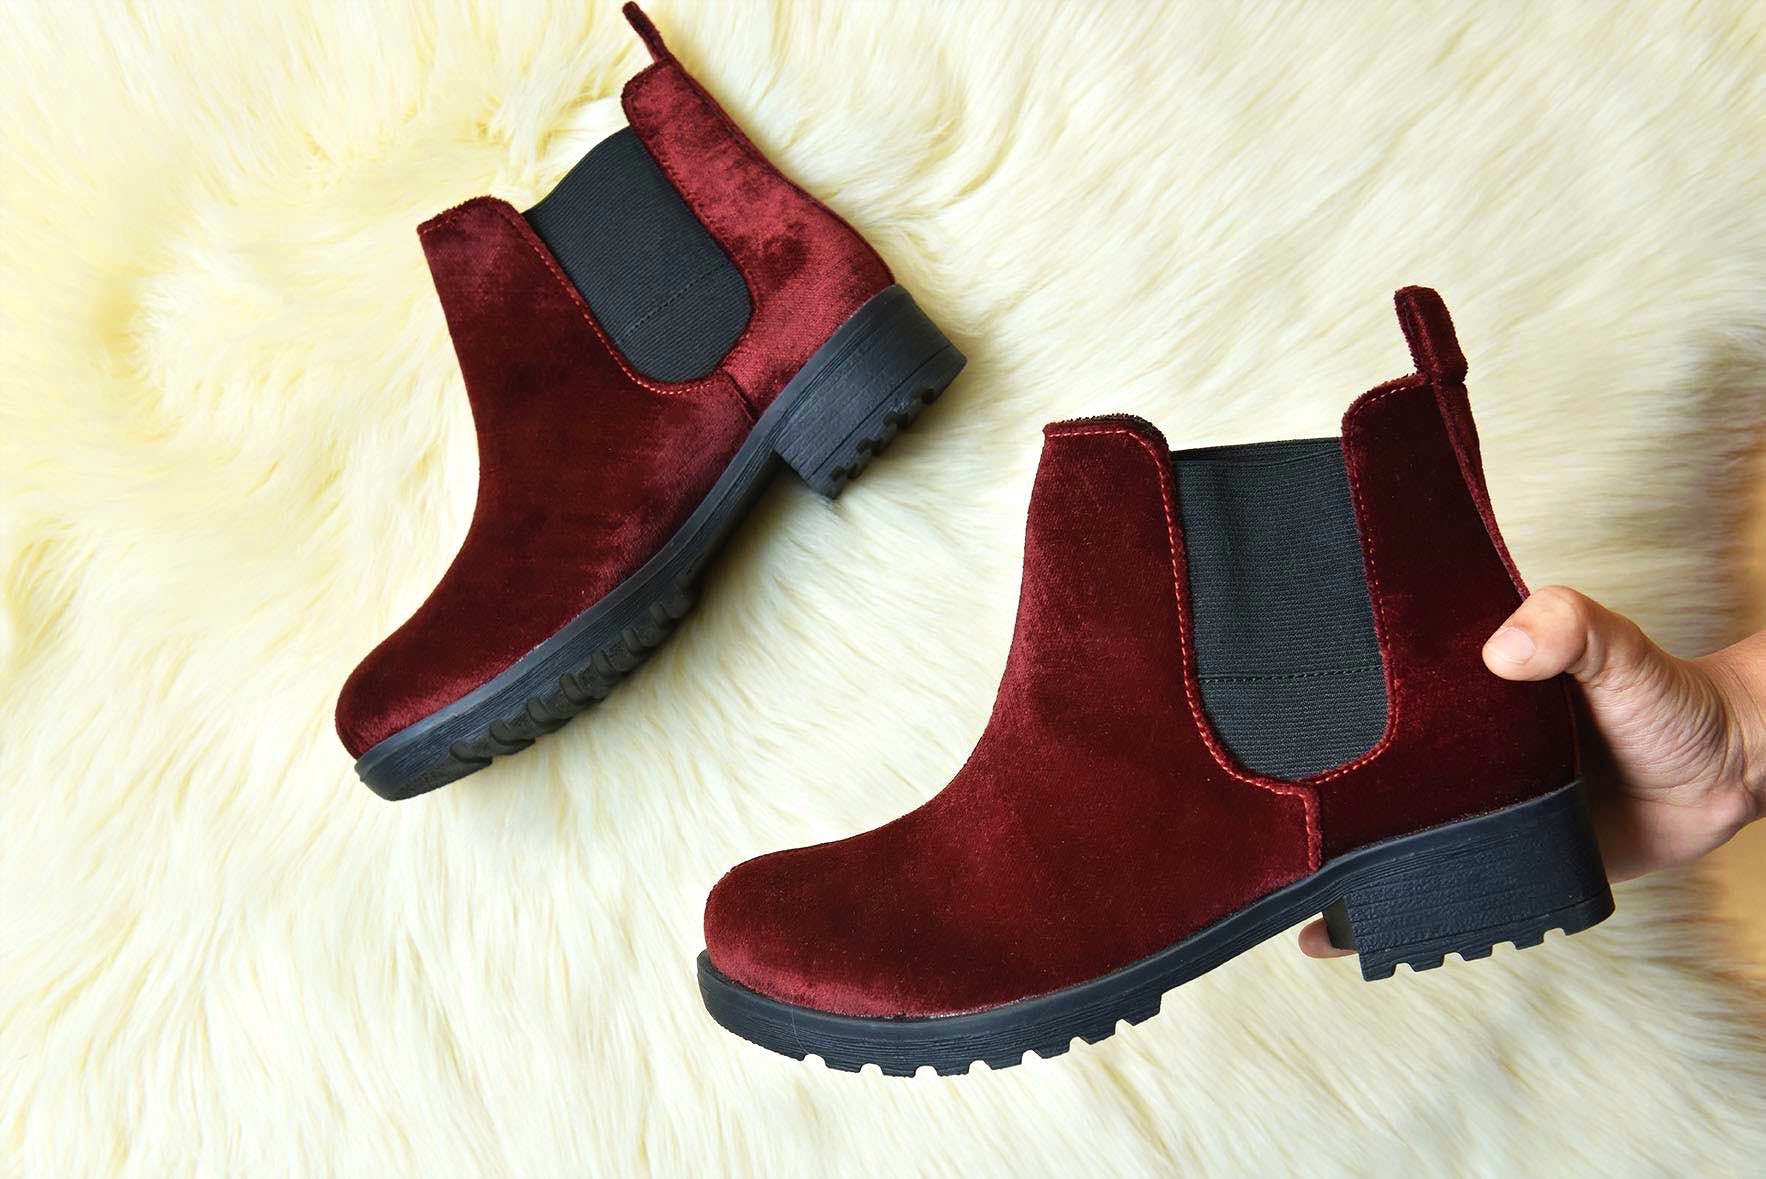 Footwear,Boot,Shoe,Red,Brown,Snow boot,Durango boot,Outdoor shoe,Leather,Suede